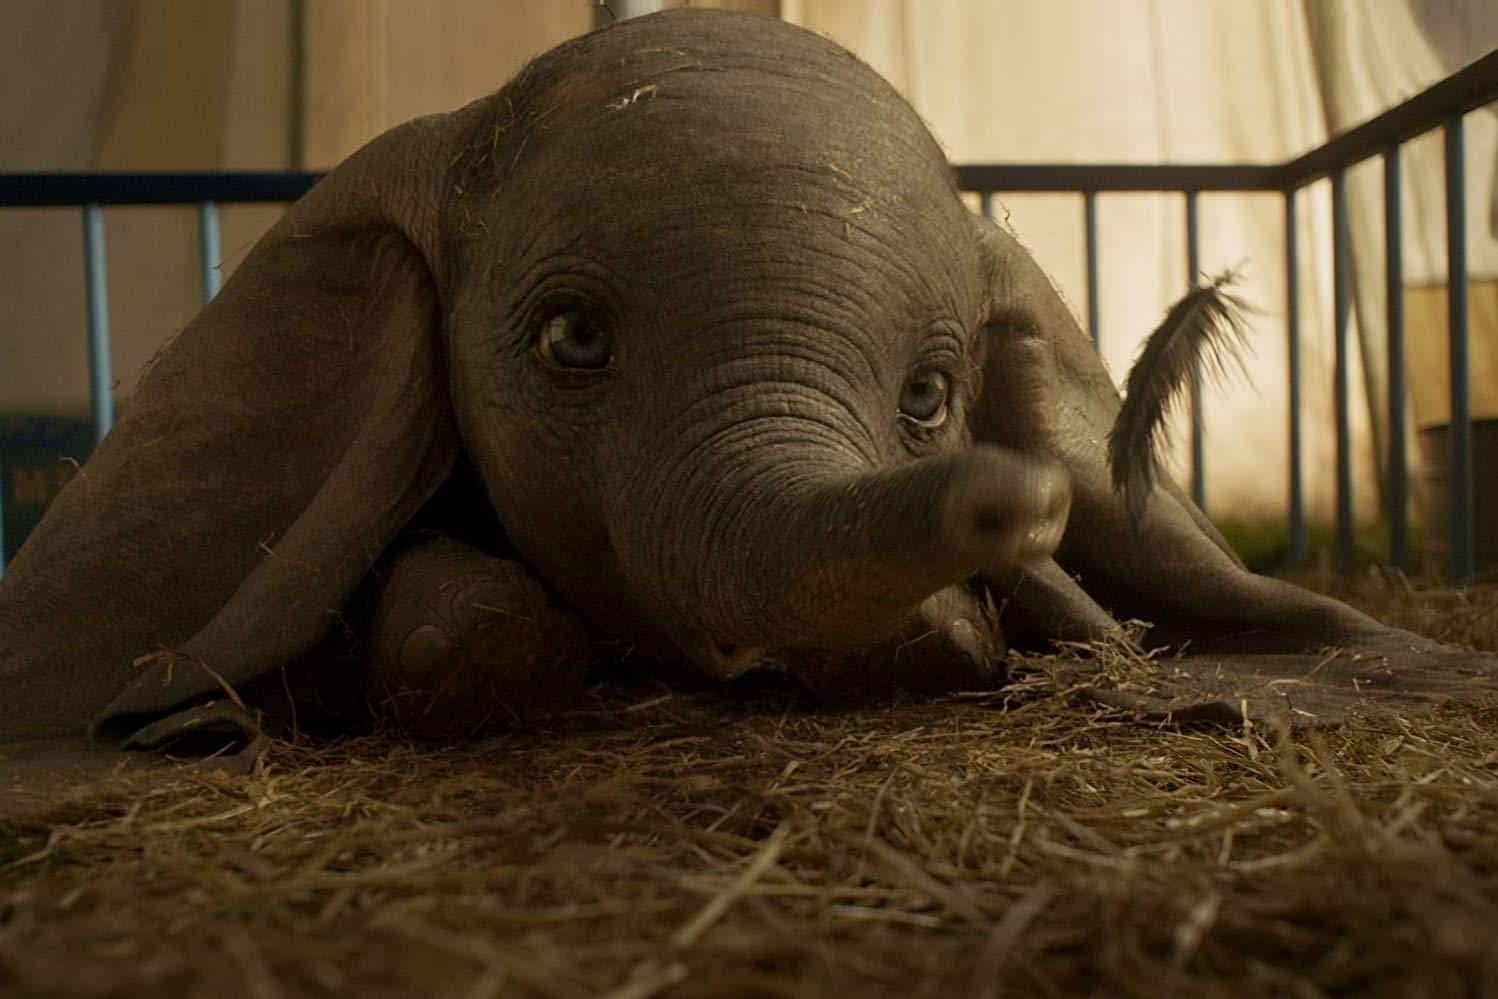 The New Trailer for Dumbo Ditches the Melancholy Tone for High Energy Fun